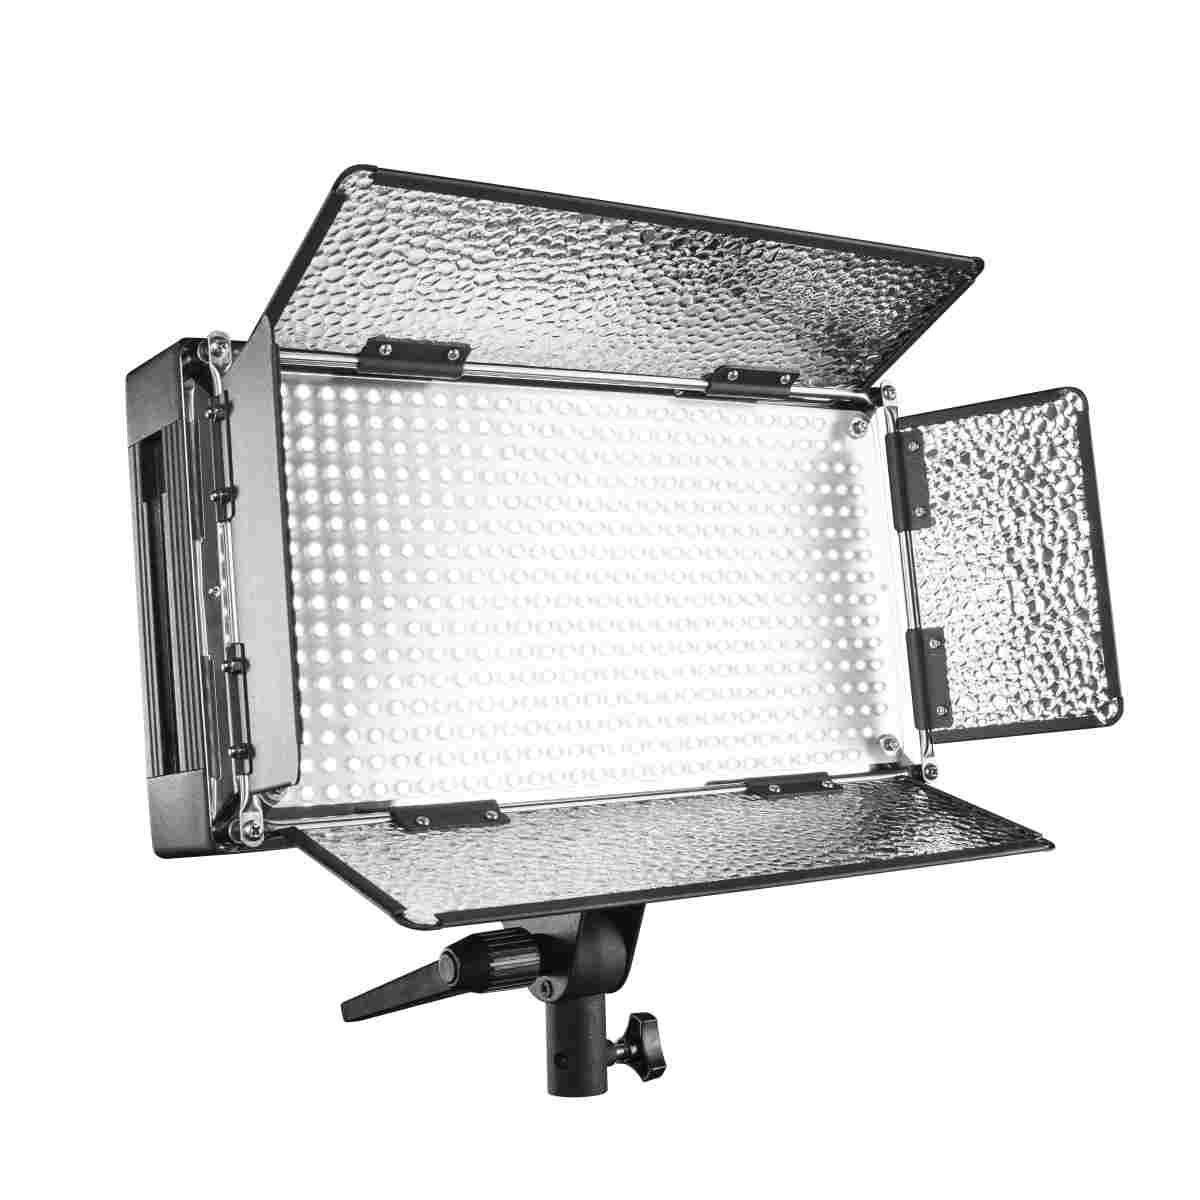 Walimex pro LED 500 Dimmable Panel Light